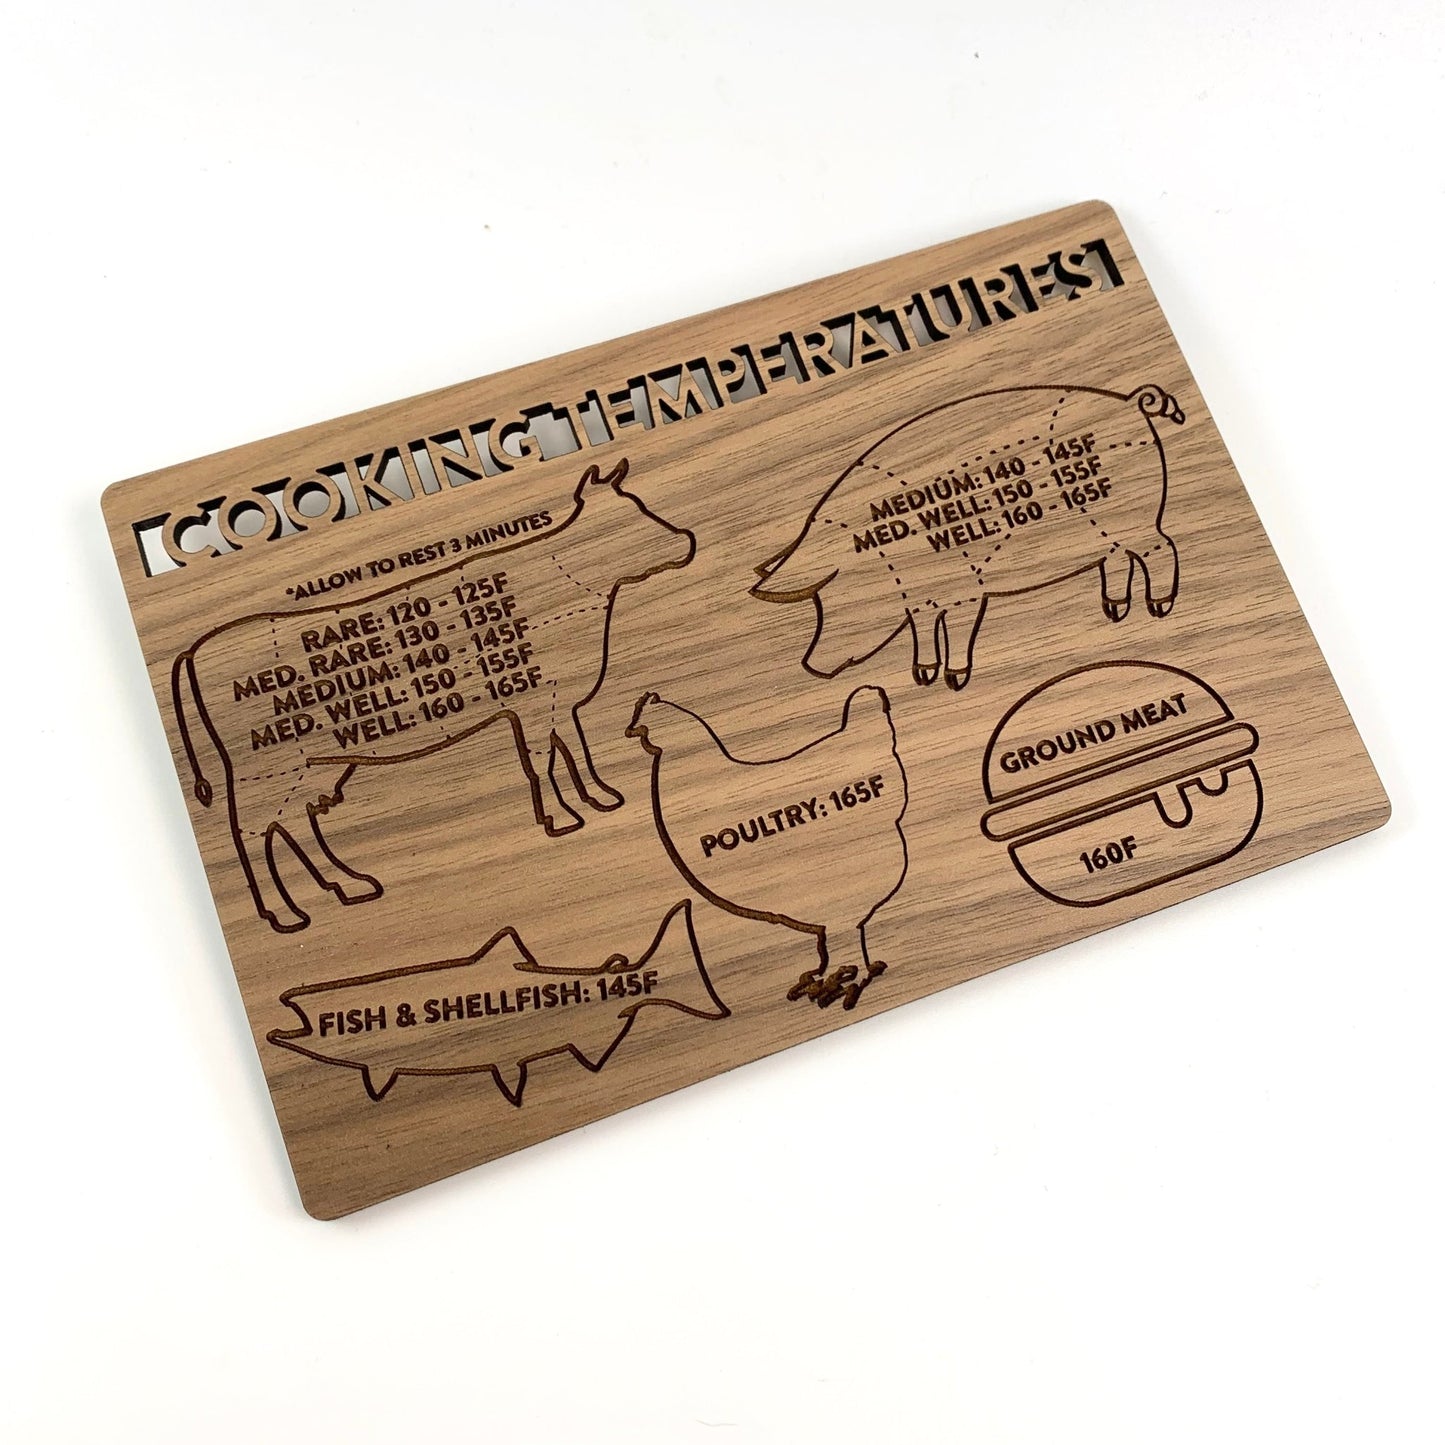 Meat Cooking Temperatures Magnet - laser cut and laser engraved walnut wood - by LeeMo Designs in Bend, Oregon